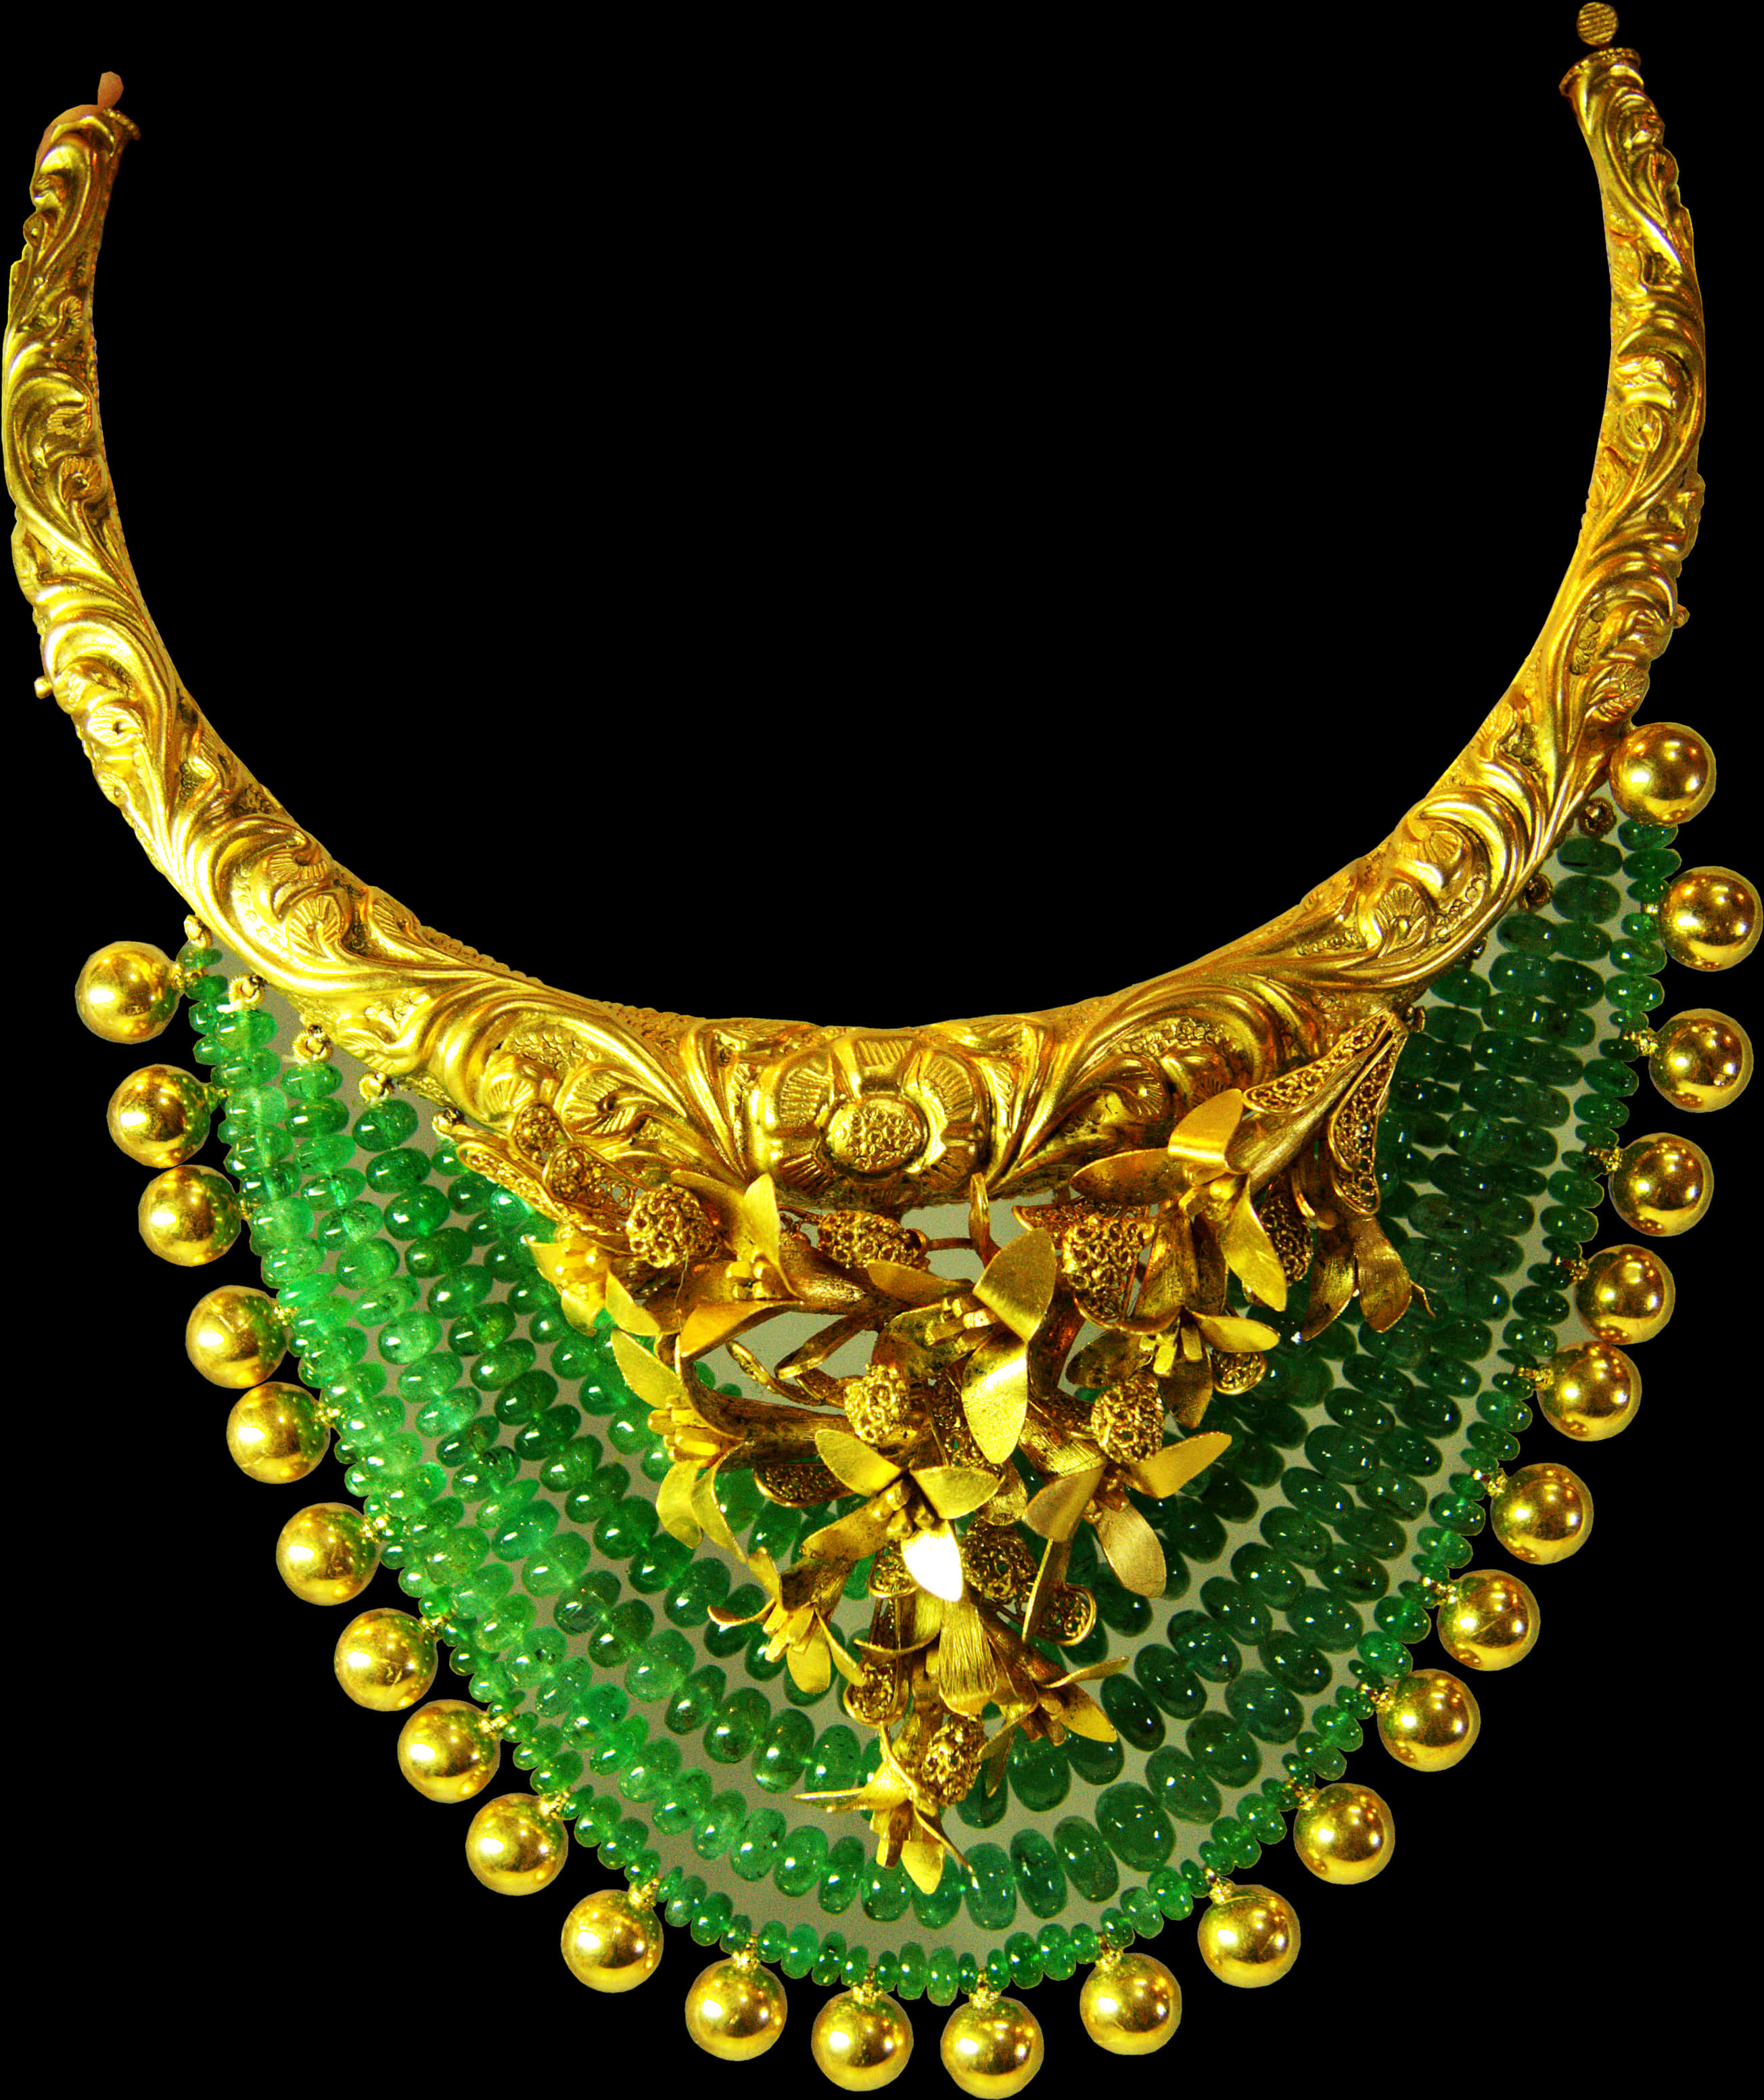 A Gold Necklace With Green Beads